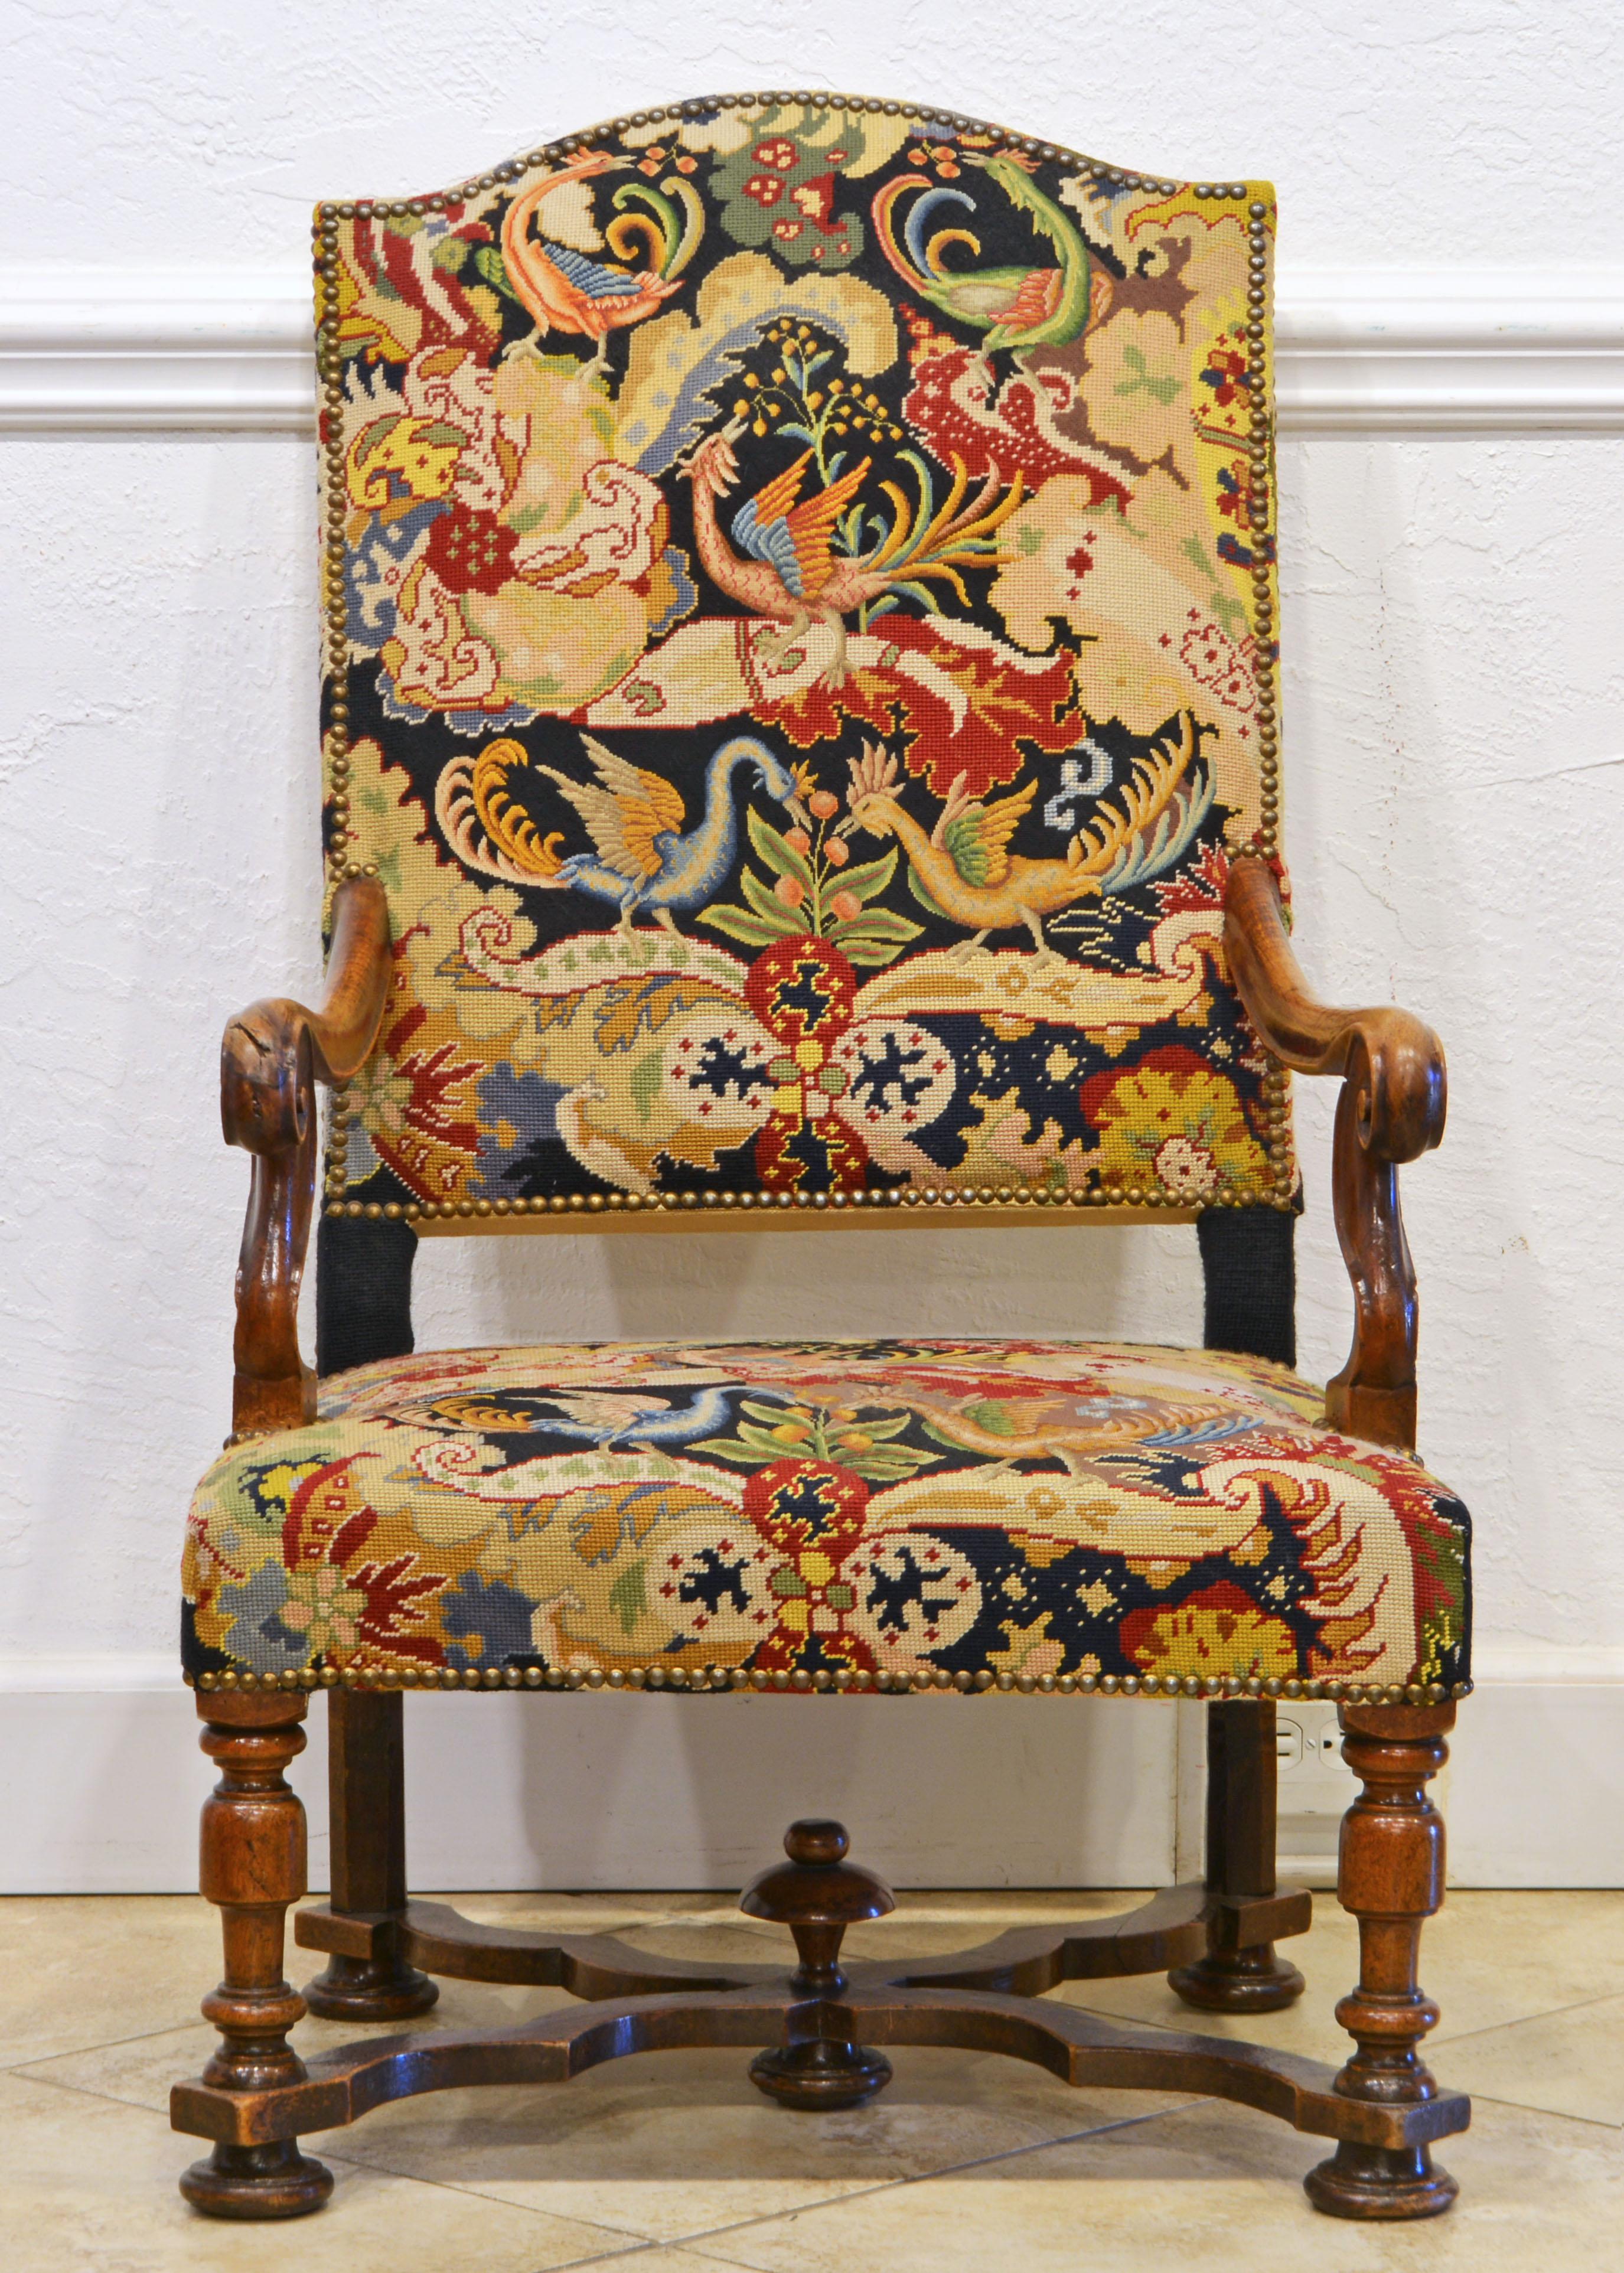 This magnificent French Provincial arm chair in the baroque style features a tall arched backrest and down swept carved armrests on serpentine shape supports rising from the seat frame. The baluster turned front legs and the straight back leg are